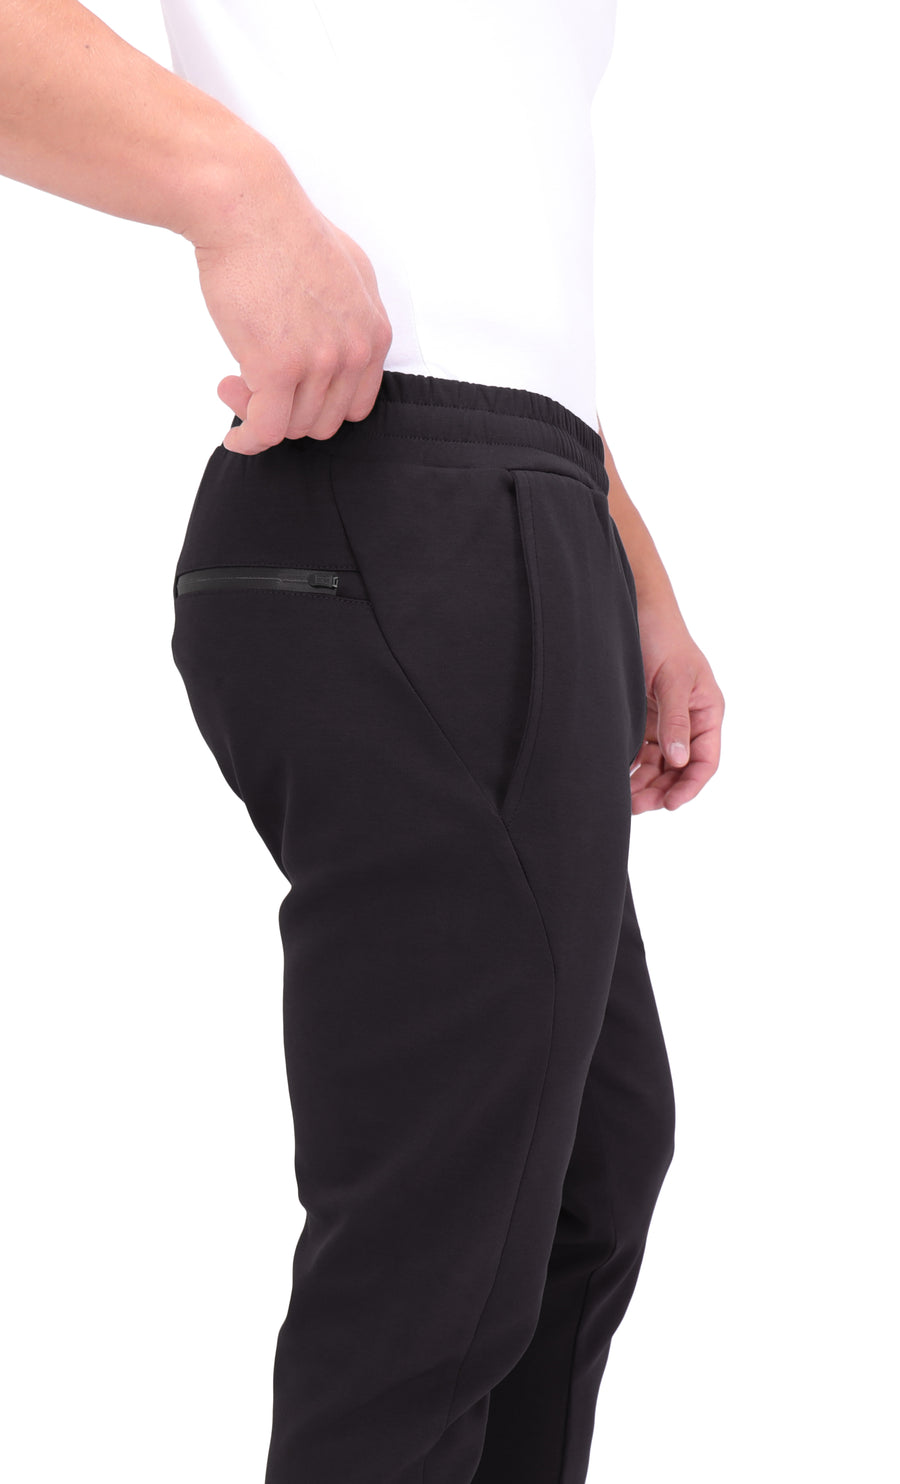 SCR SPORTSWEAR Sports-Casual Mens Pant/Sweatpant 1148-Tapered